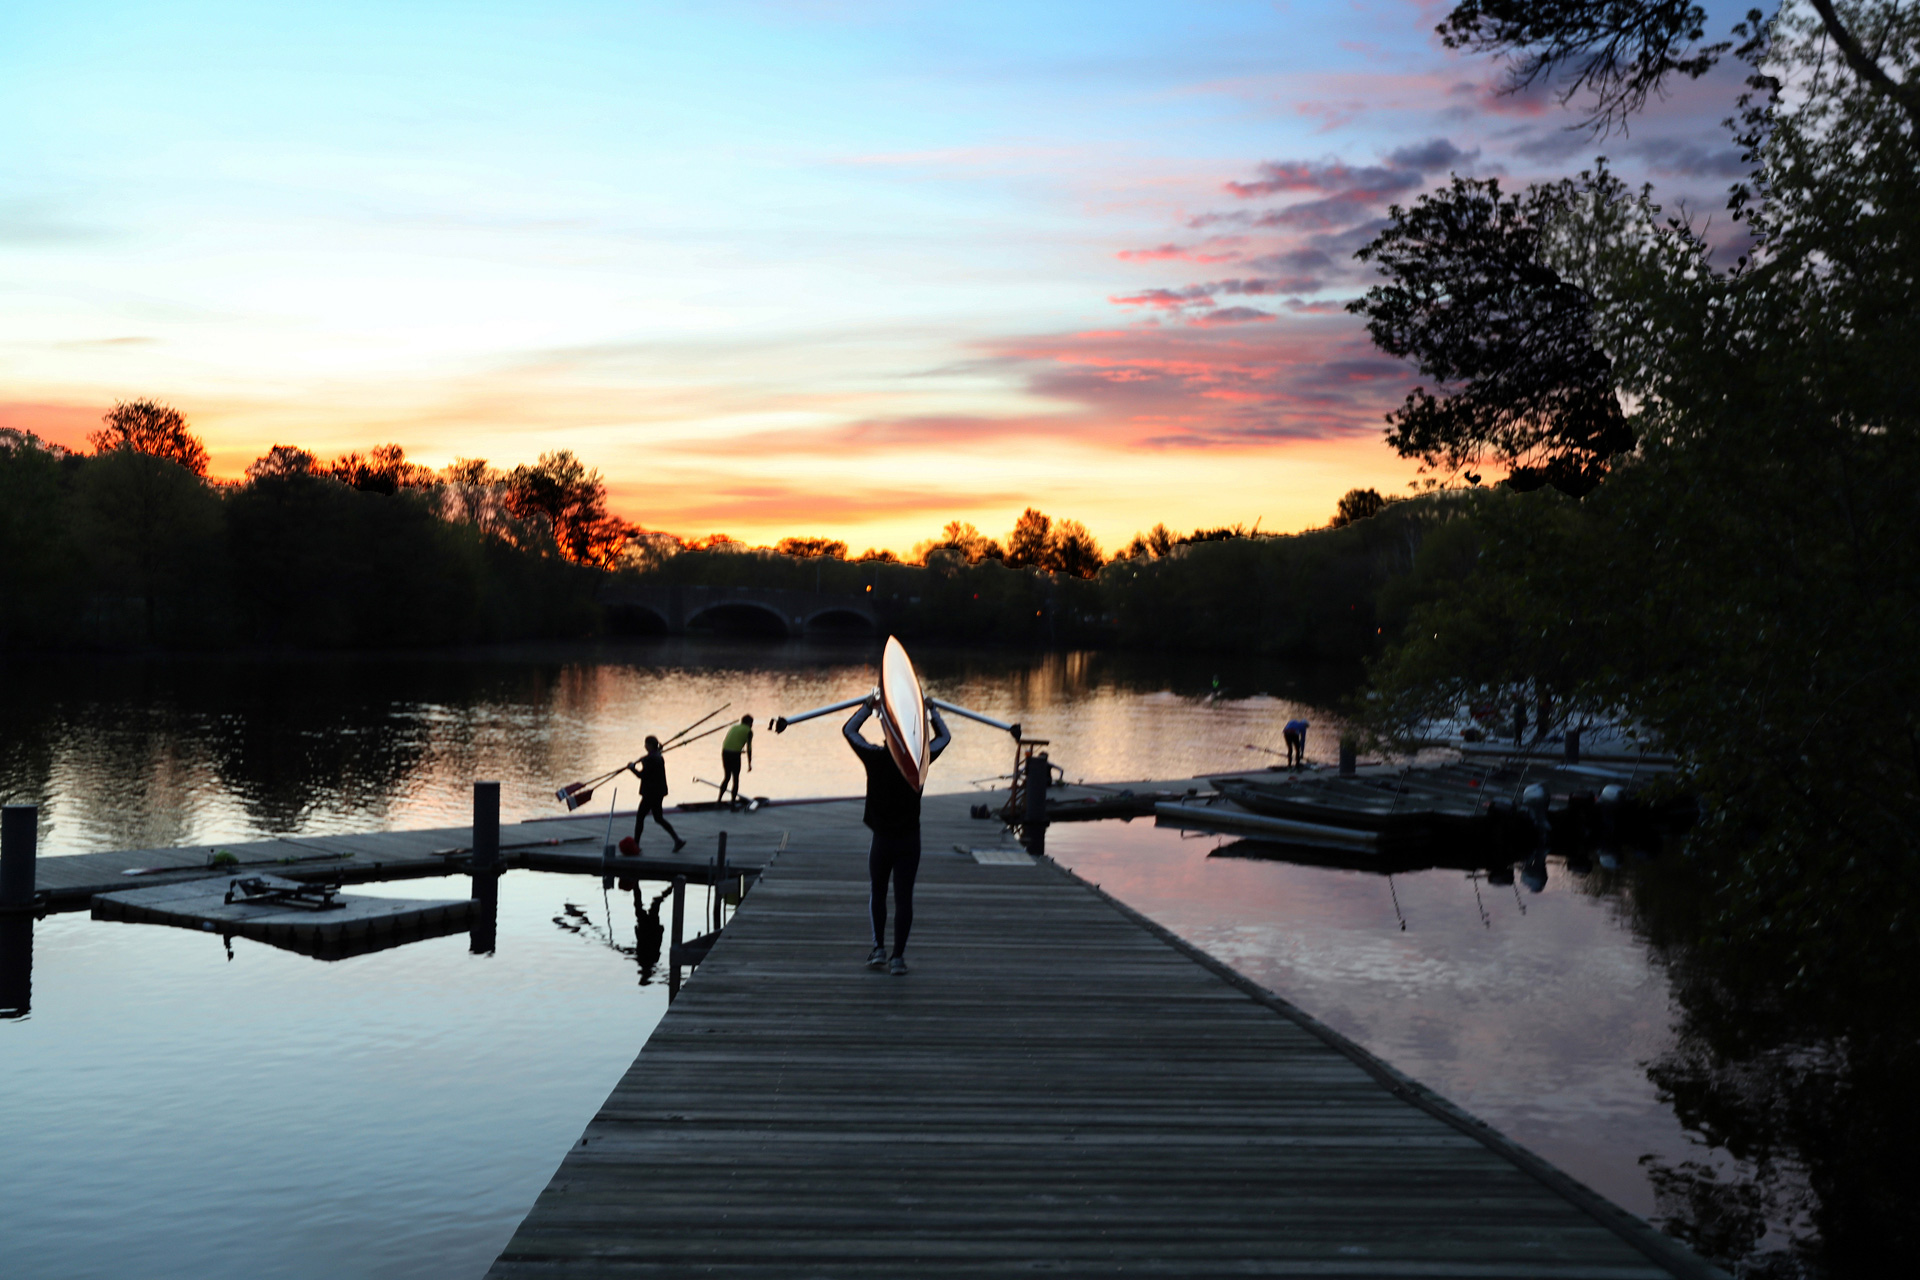 A rower heads down the dock for an early morning rowing session.